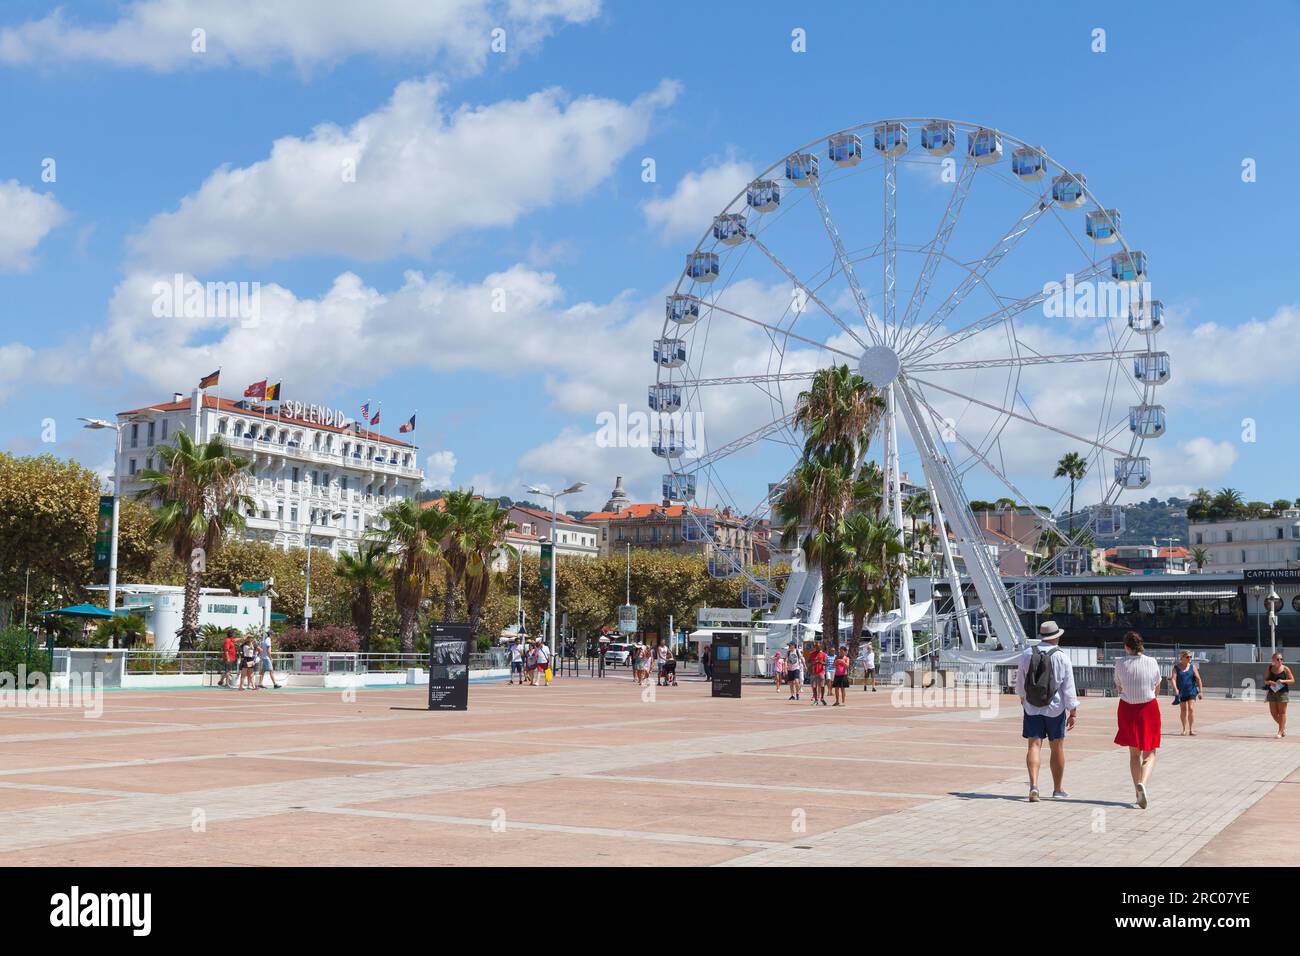 Cannes, France - August 14, 2018: Tourists walk the Esplanade Pantiero in front of the Ferris wheel on a sunny summer day Stock Photo